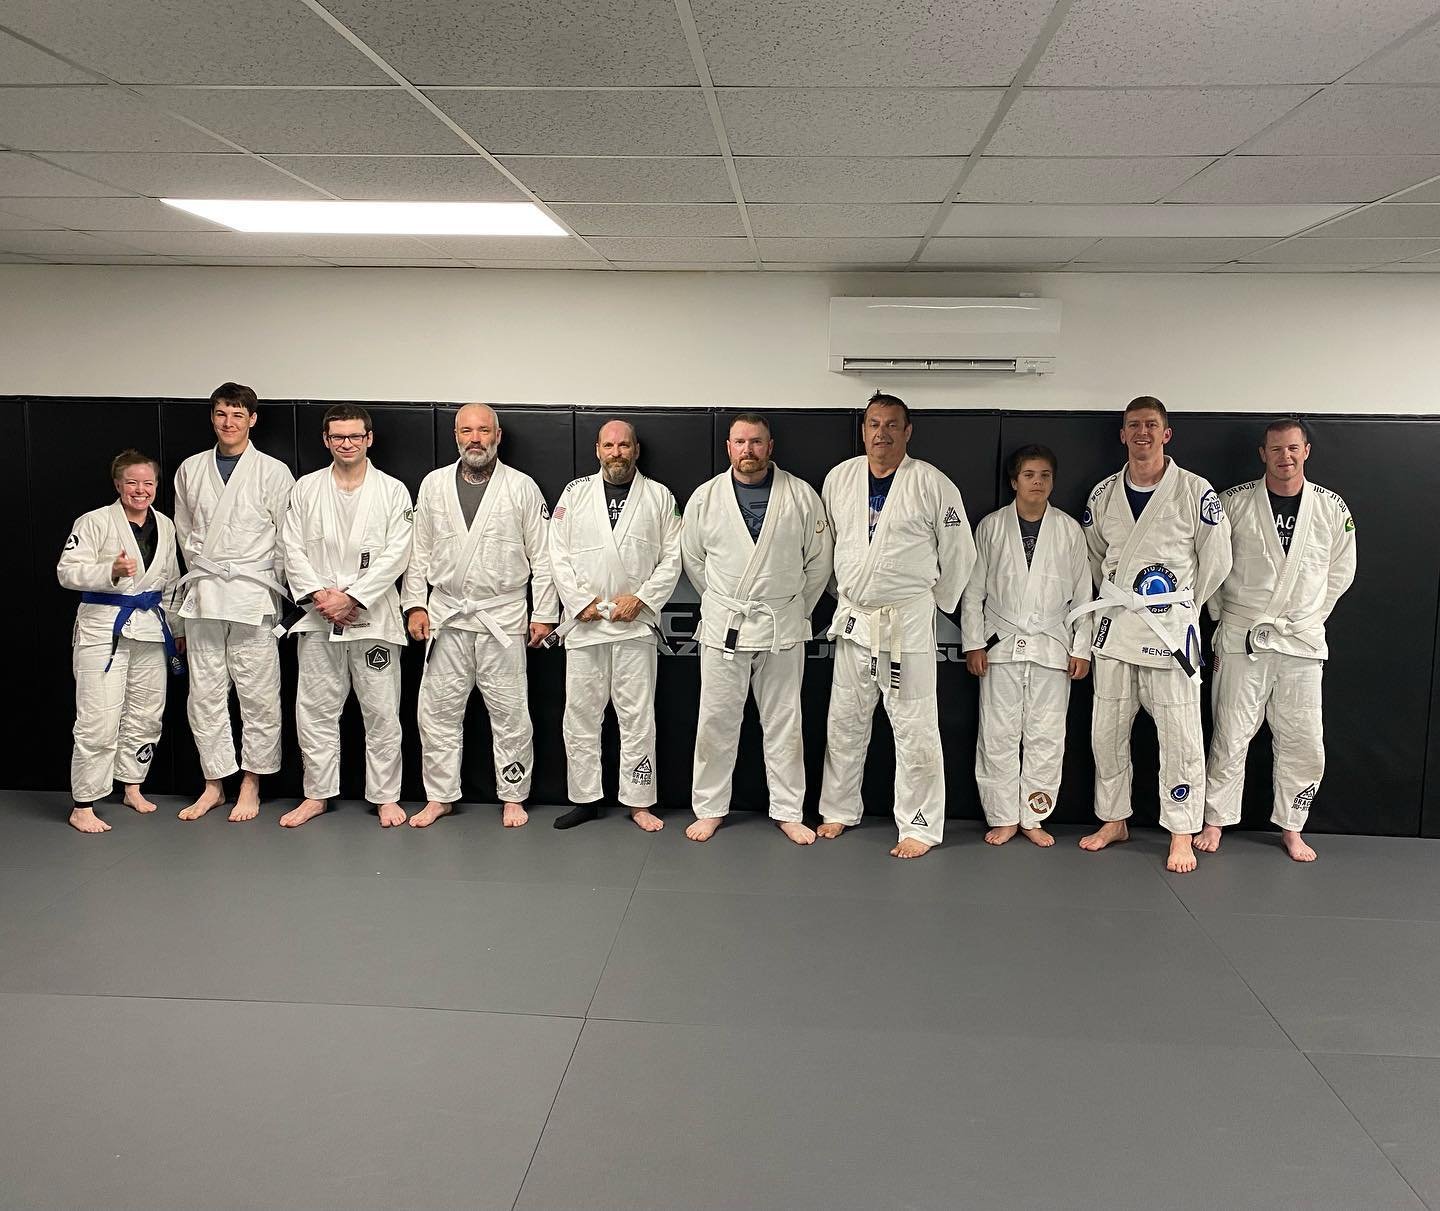 A couple of shoutouts to some fresh one stripers in Gracie Combatives! First, Sean earned his first stripe last week. Sean has been a great addition to the gym and is always a pleasure to be around. Has great questions and insights. Secondly, first s